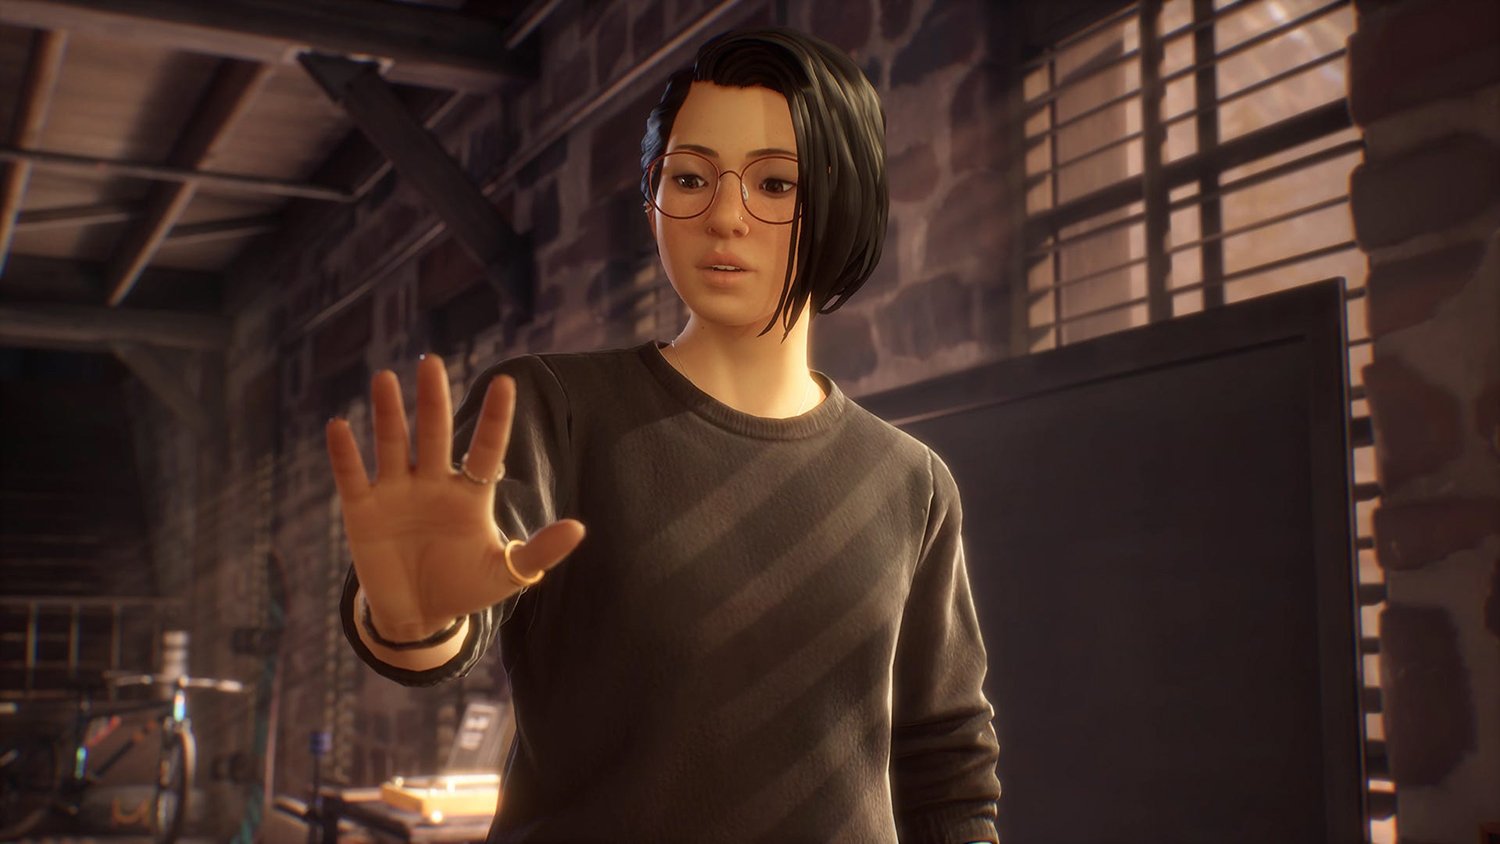 Life Is Strange: True Colors protagonist Alex Chen uses her power